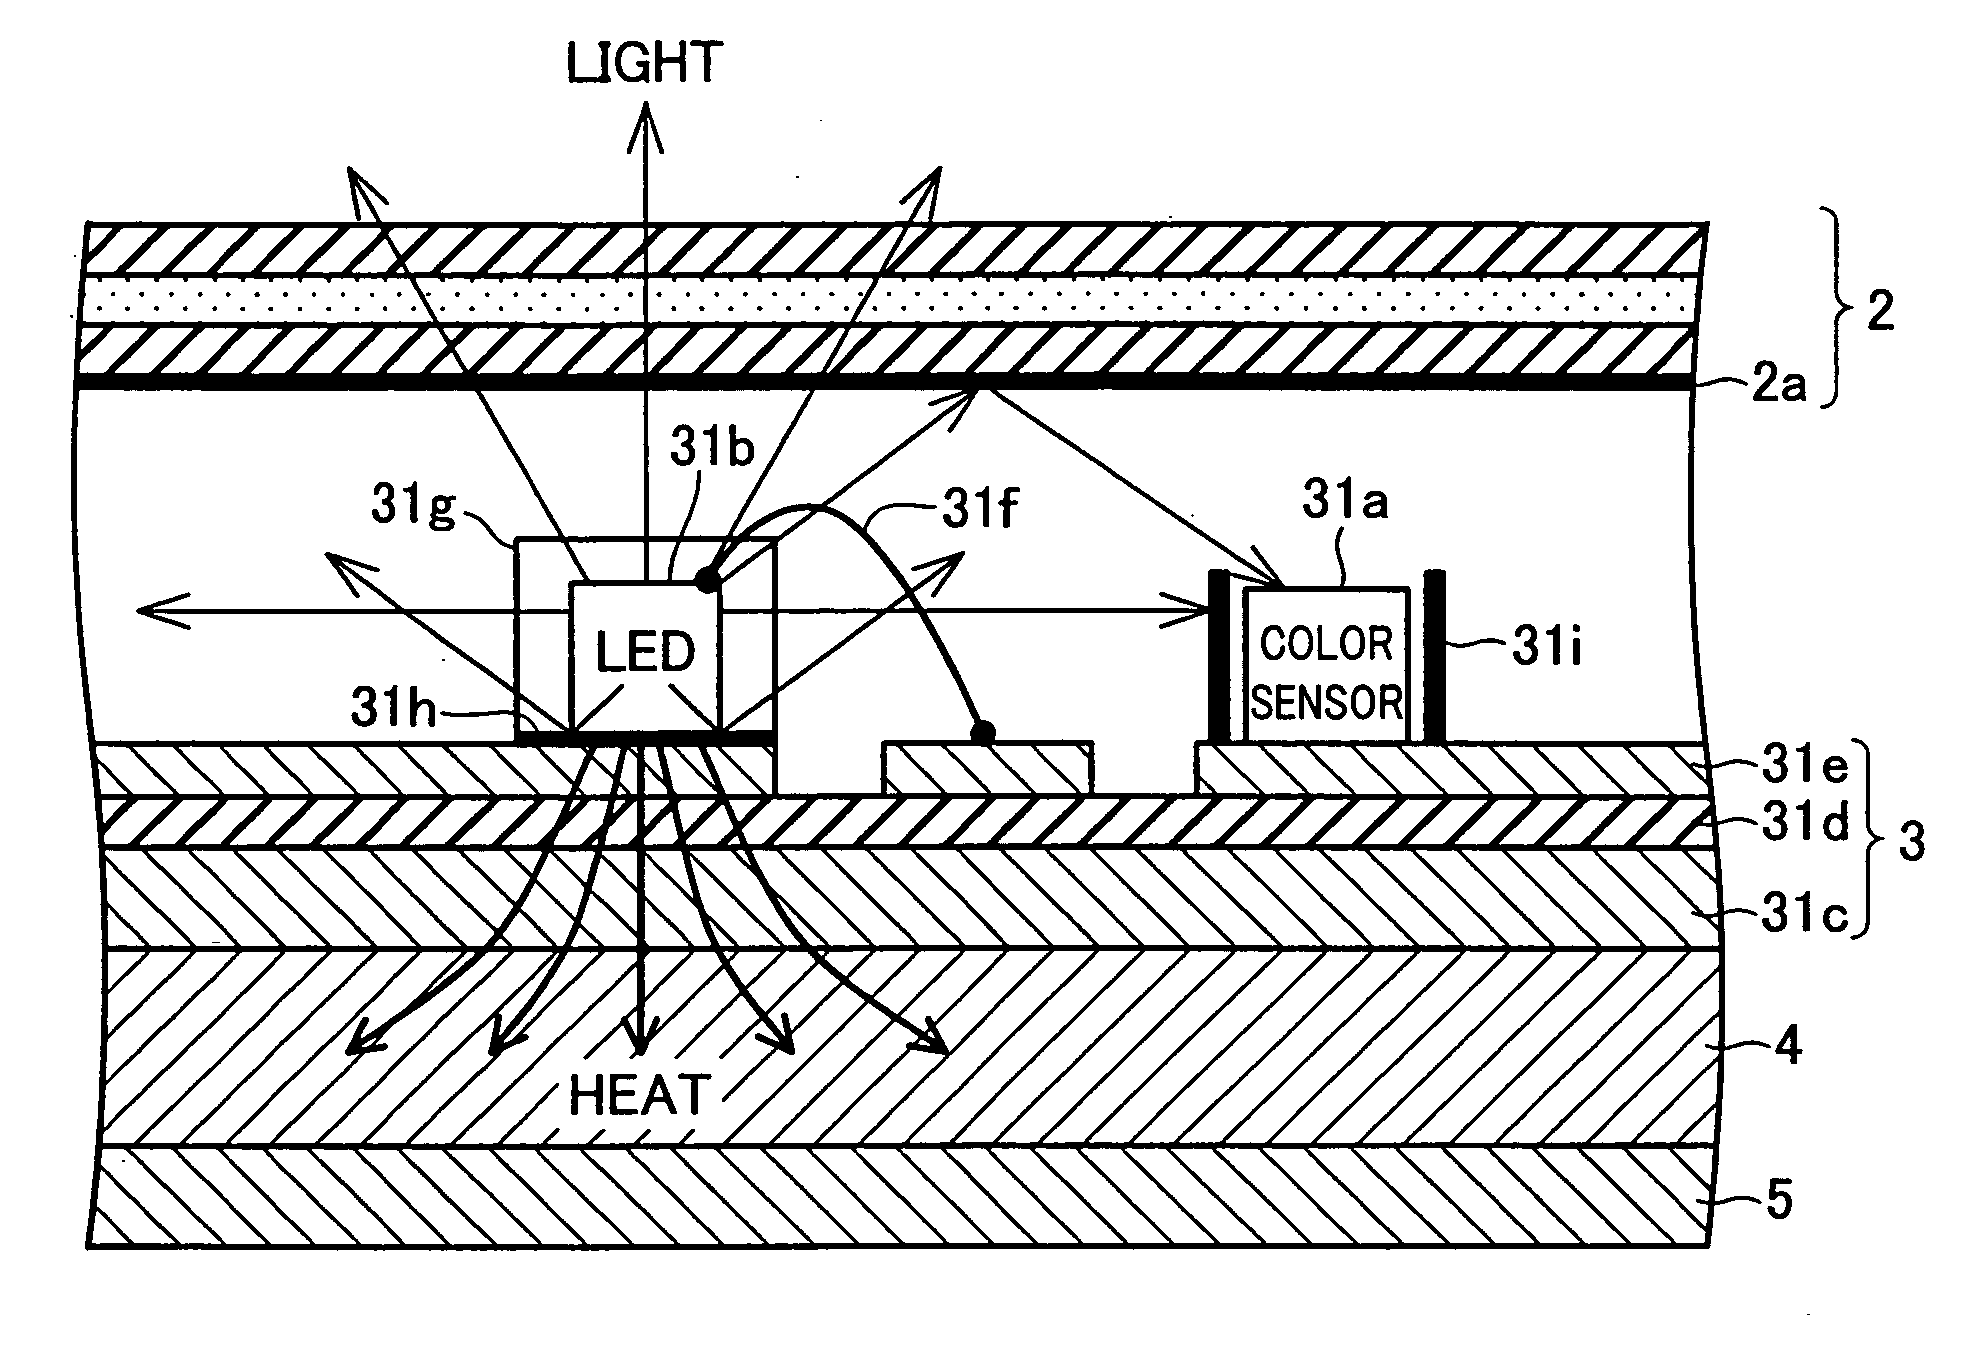 Backlight device, display apparatus including backlight device, method for driving backlight device, and method for adjusting backlight device